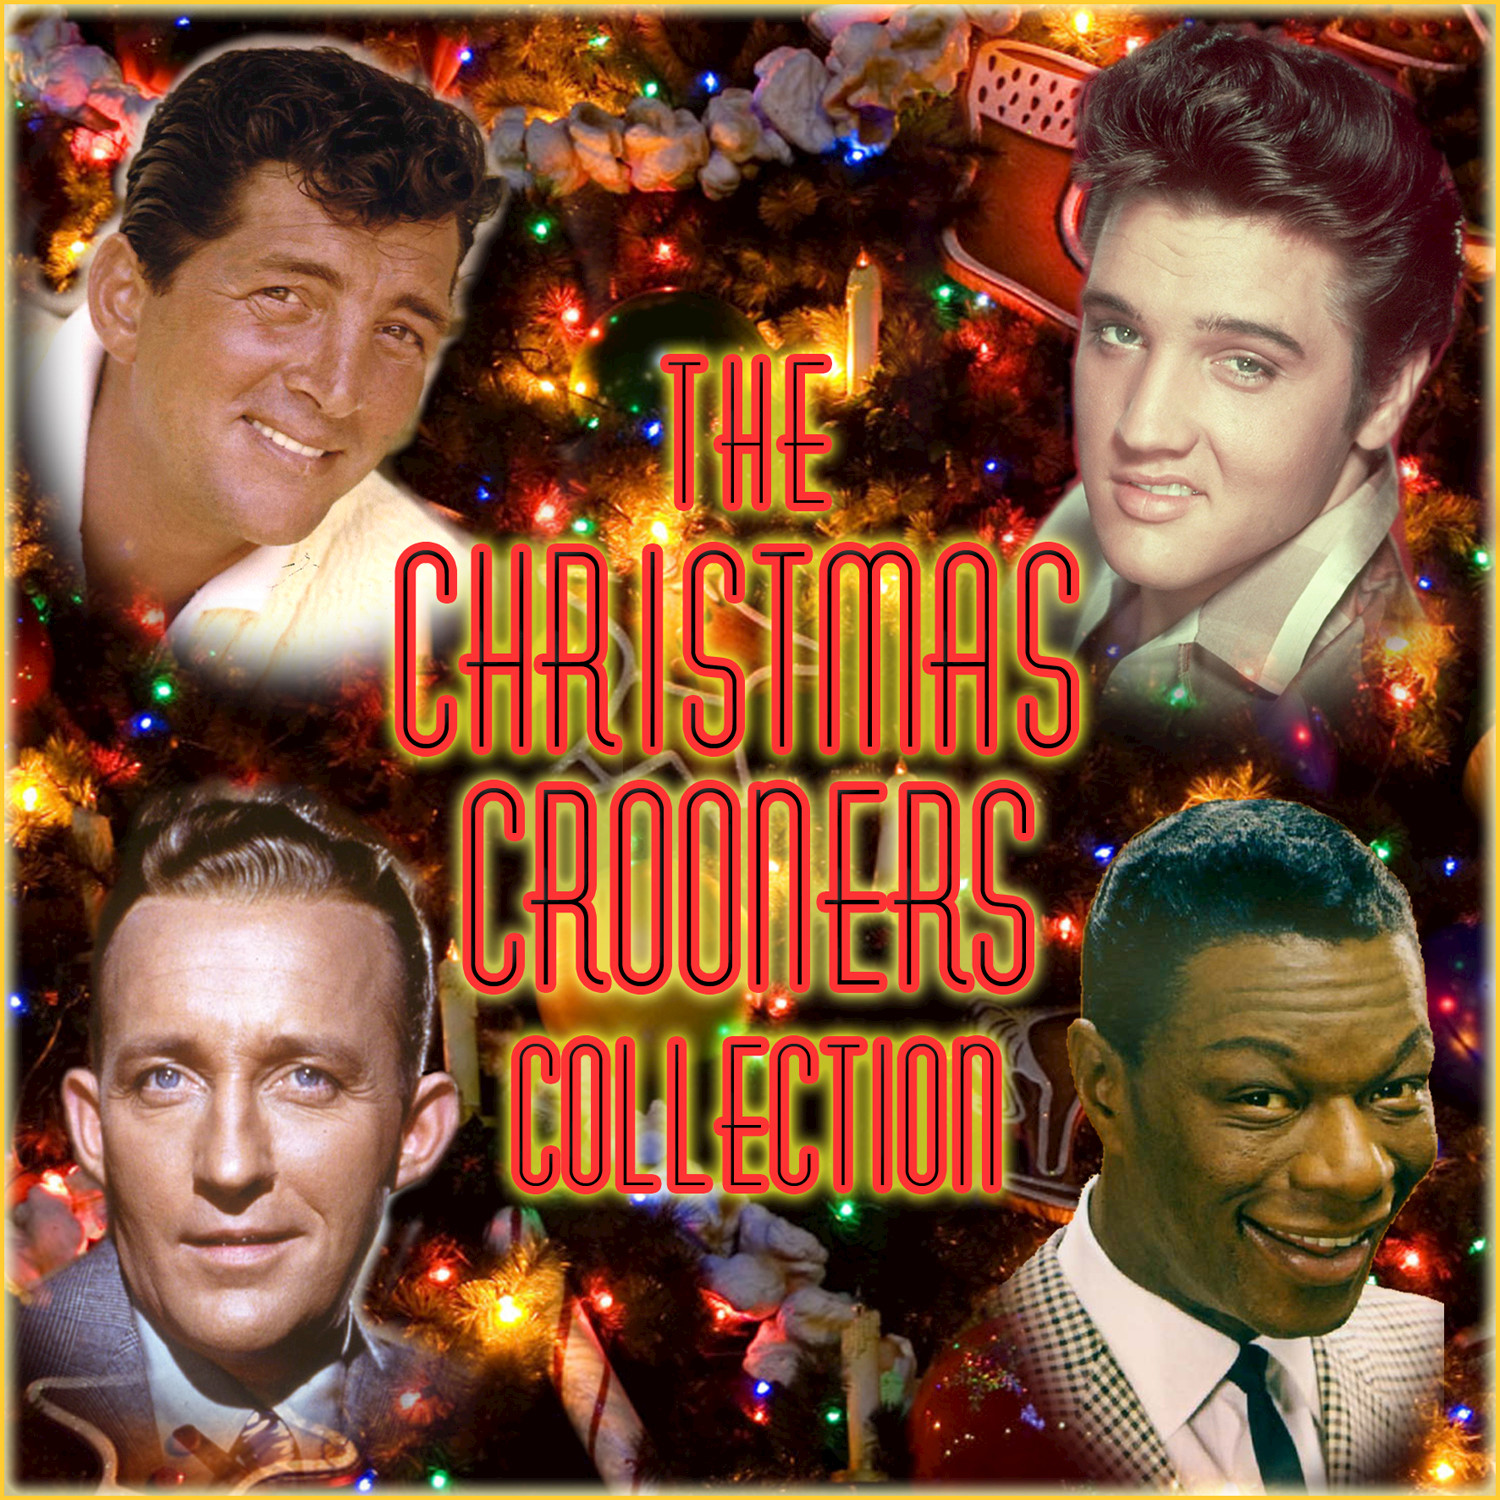 The Christmas Crooner Collection